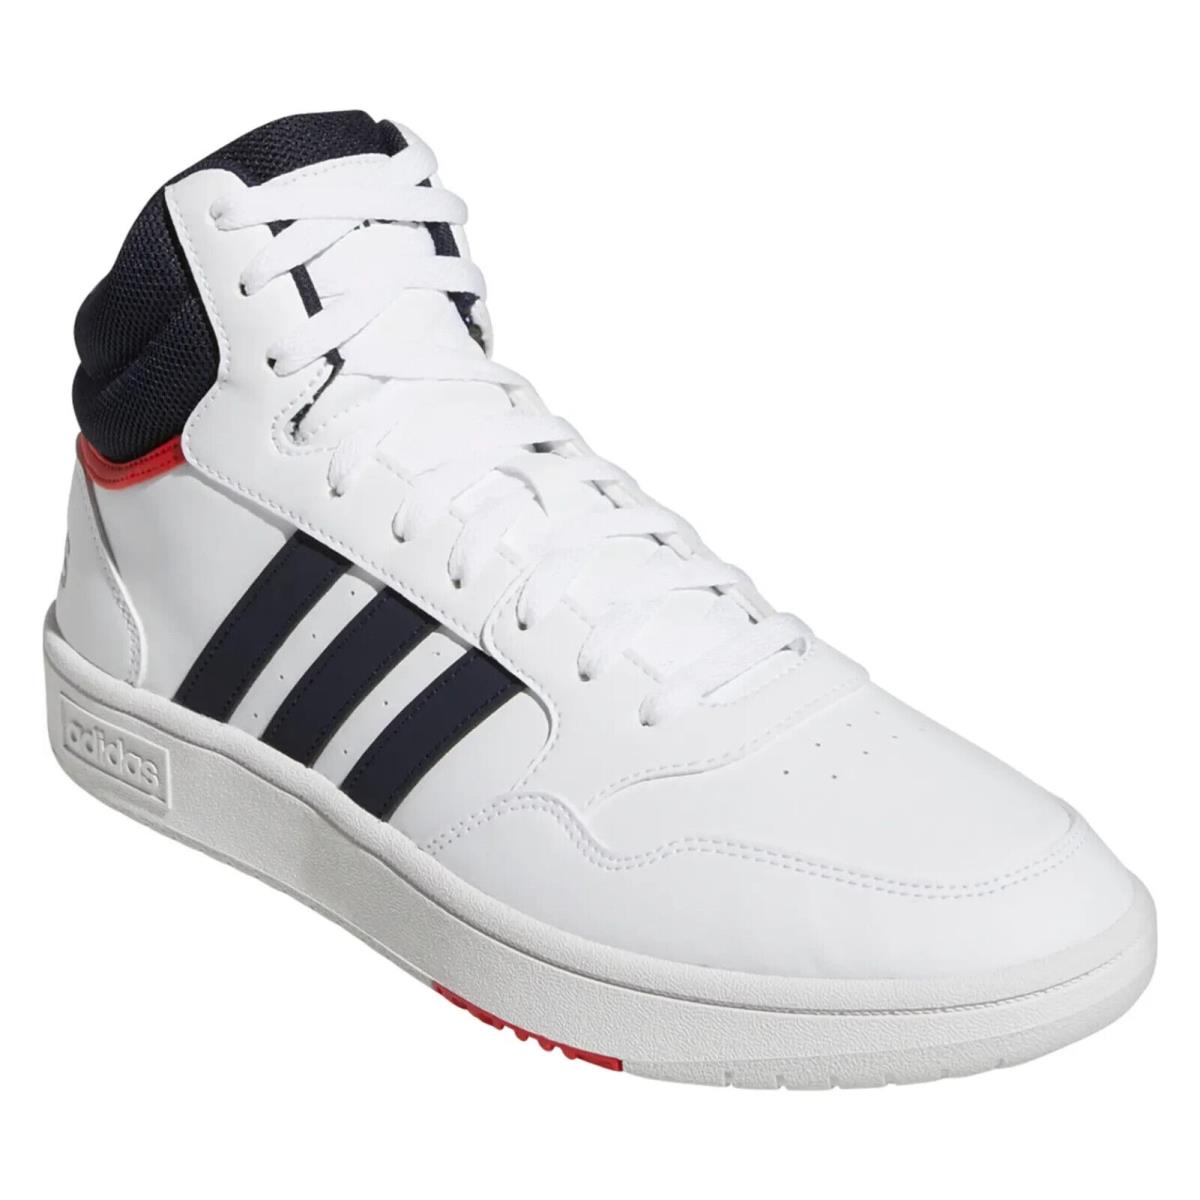 Men Adidas Hoops 3.0 Mid Basketball Shoes GY5543 White Legend Ink Red